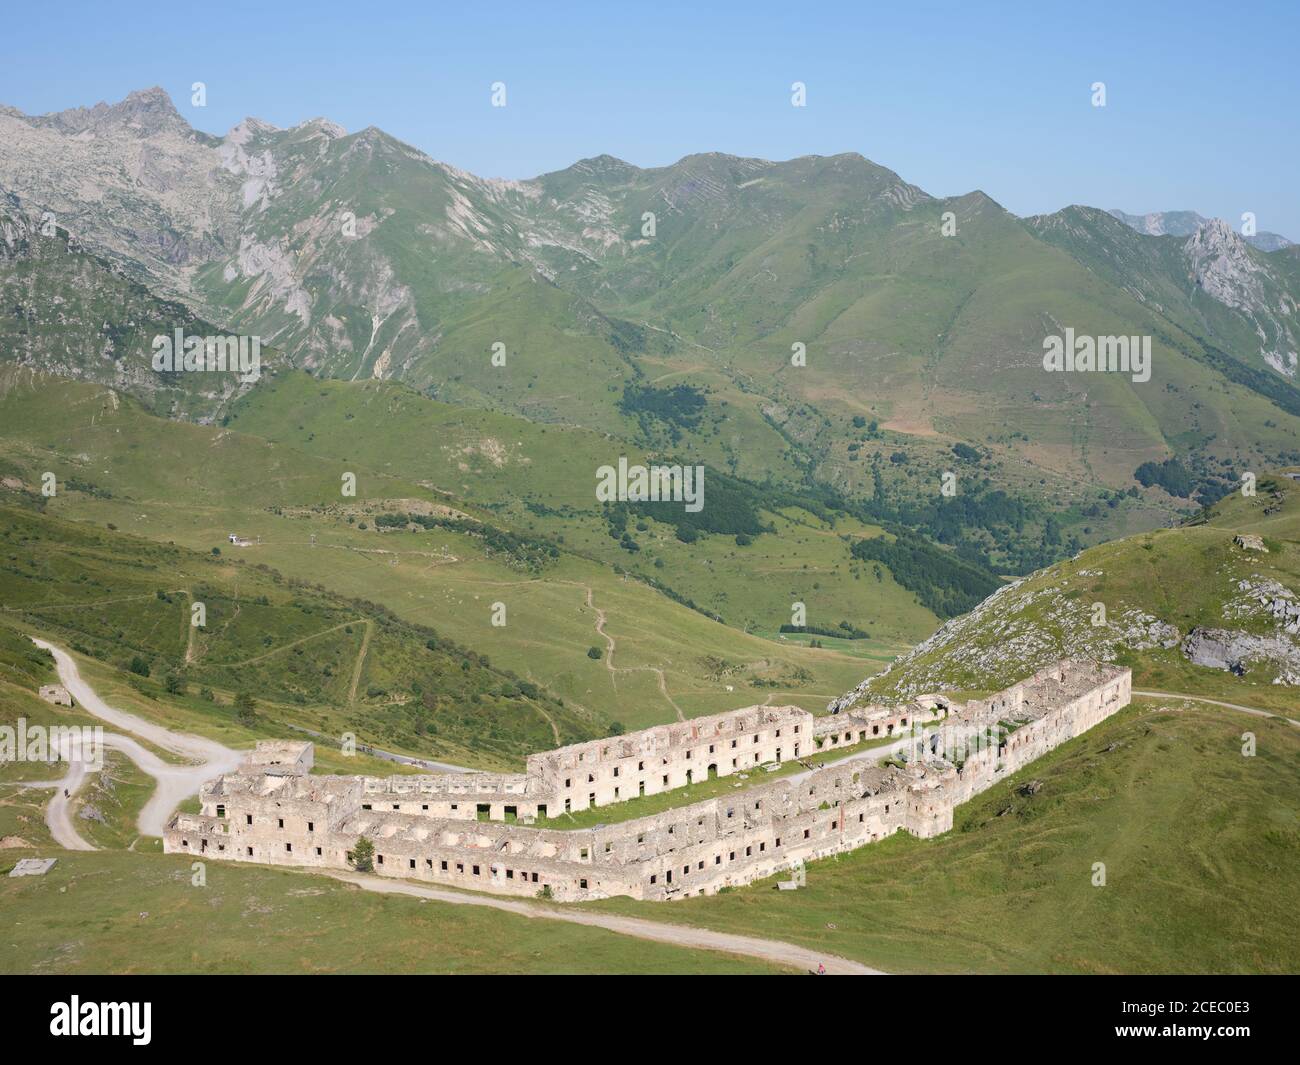 AERIAL VIEW. Annex of Fort Central, an old military fortification at Col de Tende. Alpes-Maritimes, France. Stock Photo